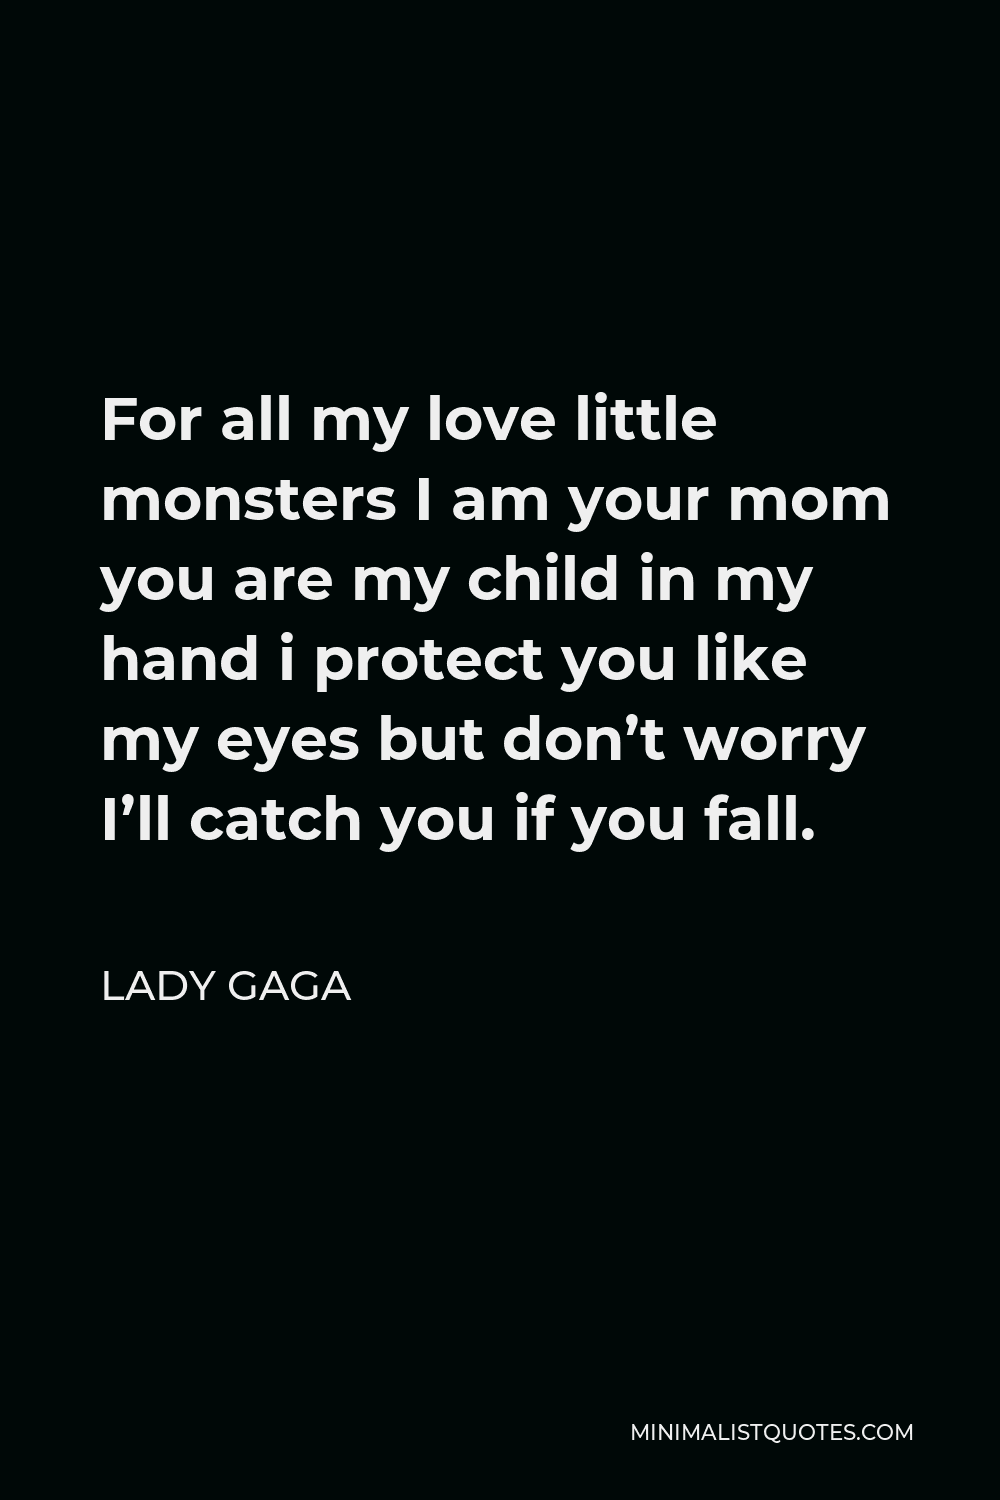 Lady Gaga Quote - For all my love little monsters I am your mom you are my child in my hand i protect you like my eyes but don’t worry I’ll catch you if you fall.